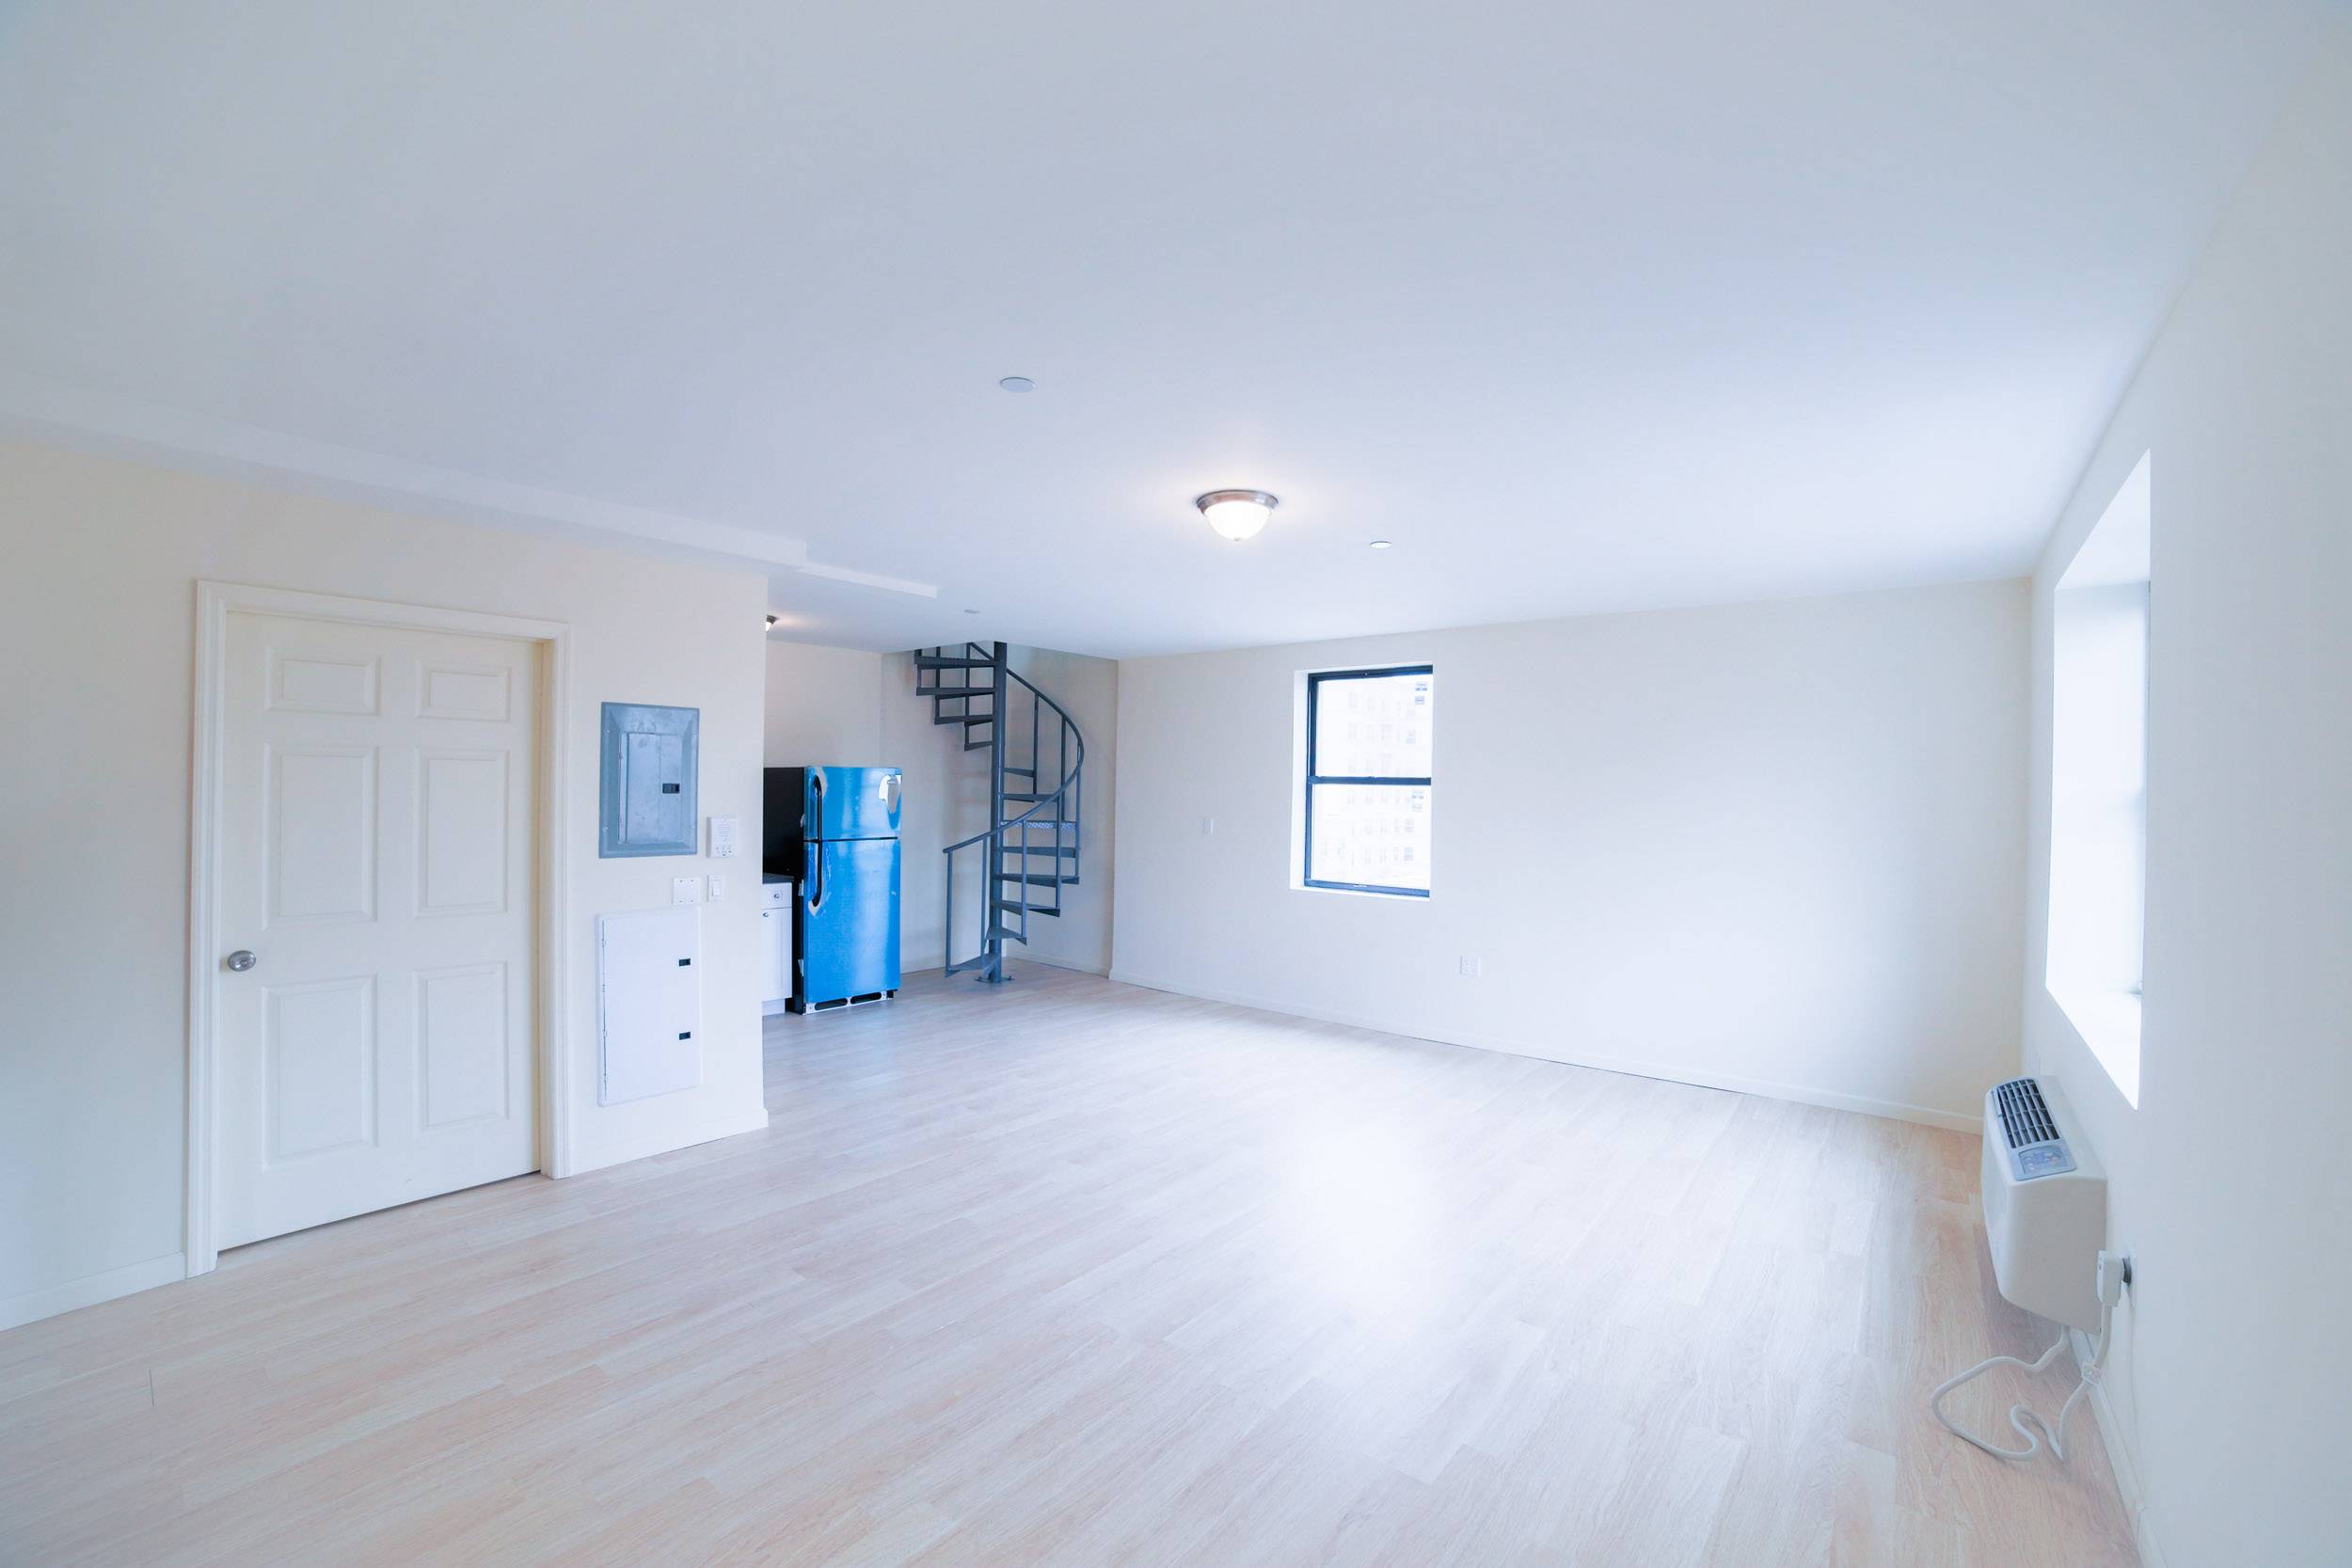 1674 Park Ave: NO FEE! New Development 2 Bedroom Duplex Penthouse with Private Terrace